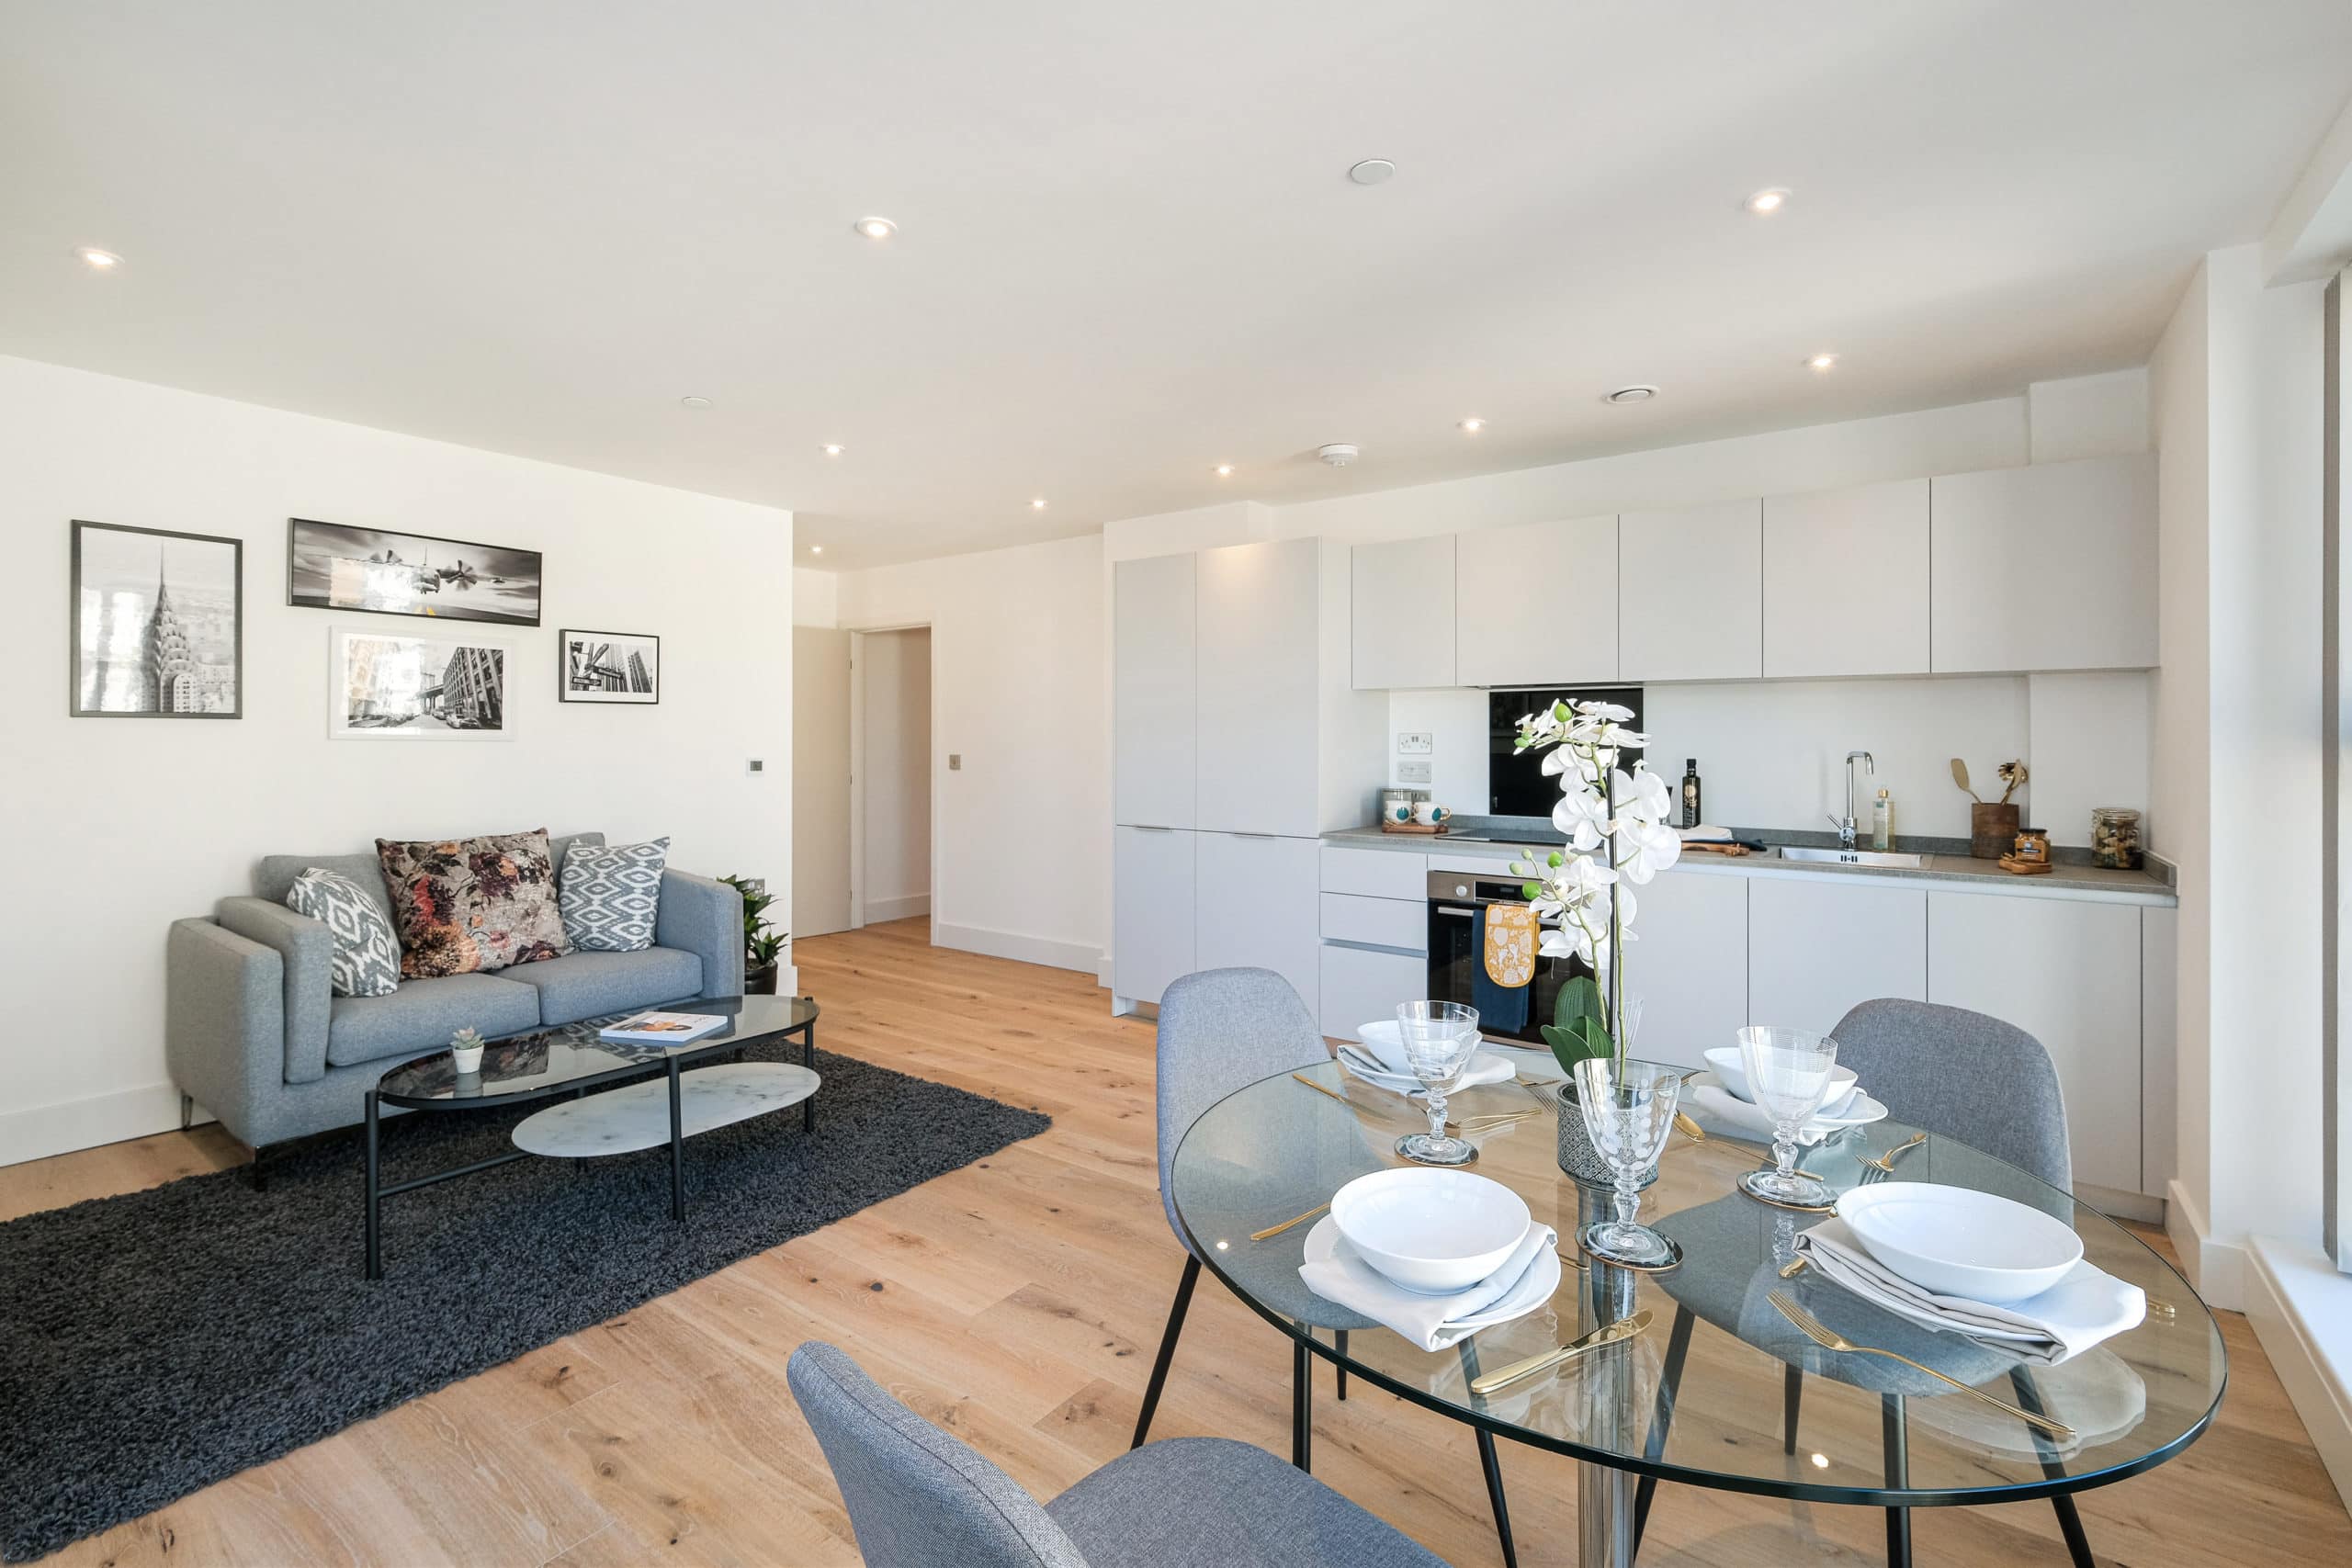 Internal photography of Latimer Homes’ Waterfront - Shared Ownership homes available on Share to Buy